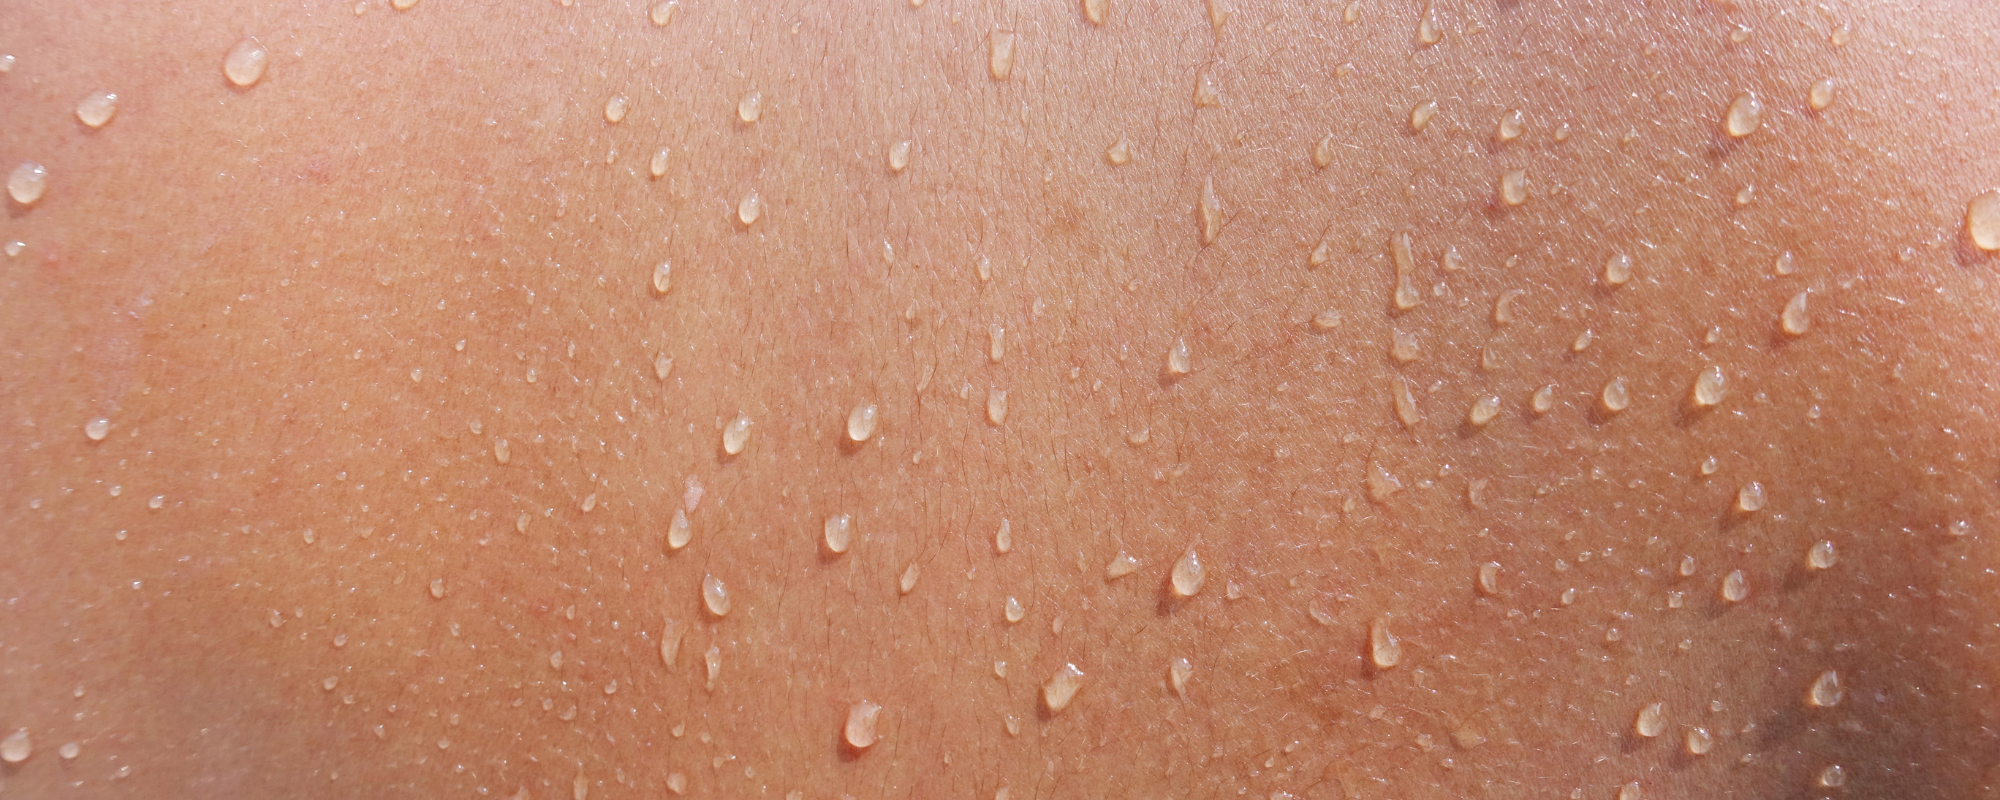 A close-up picture of skin with water droplets